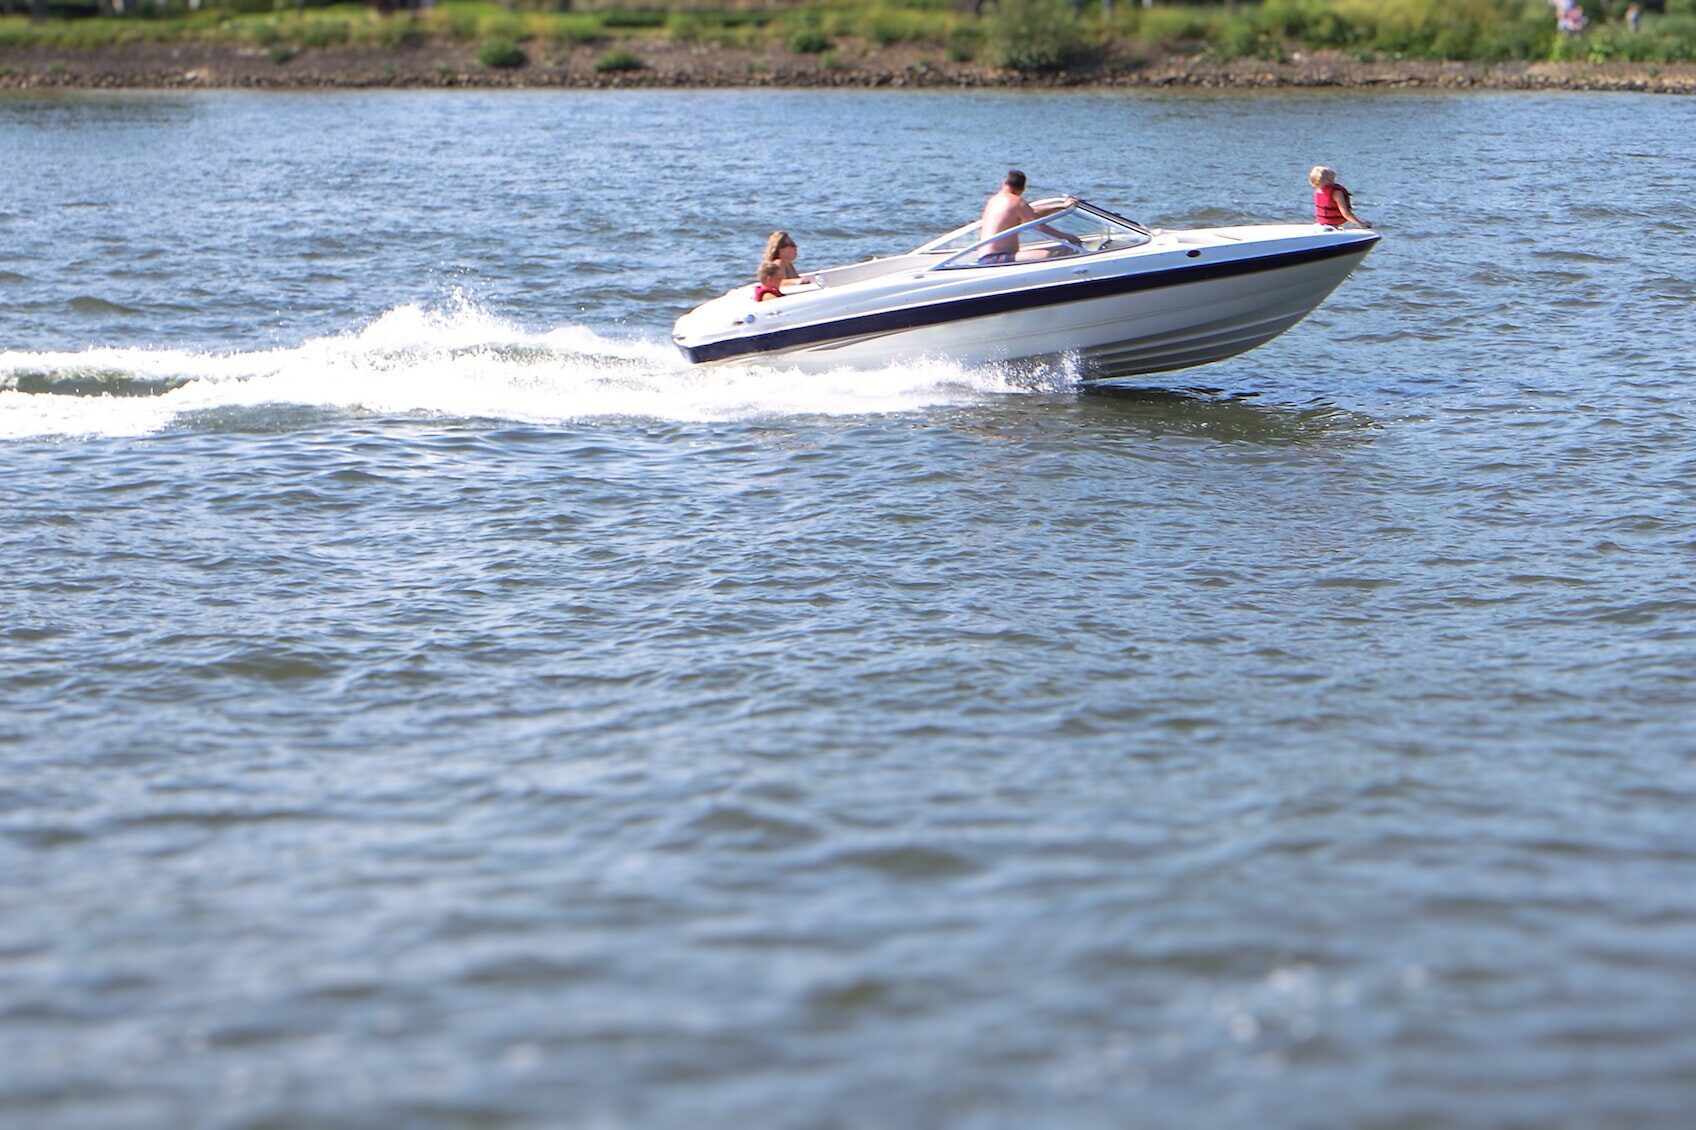 Family fun on the water with the speed boat.